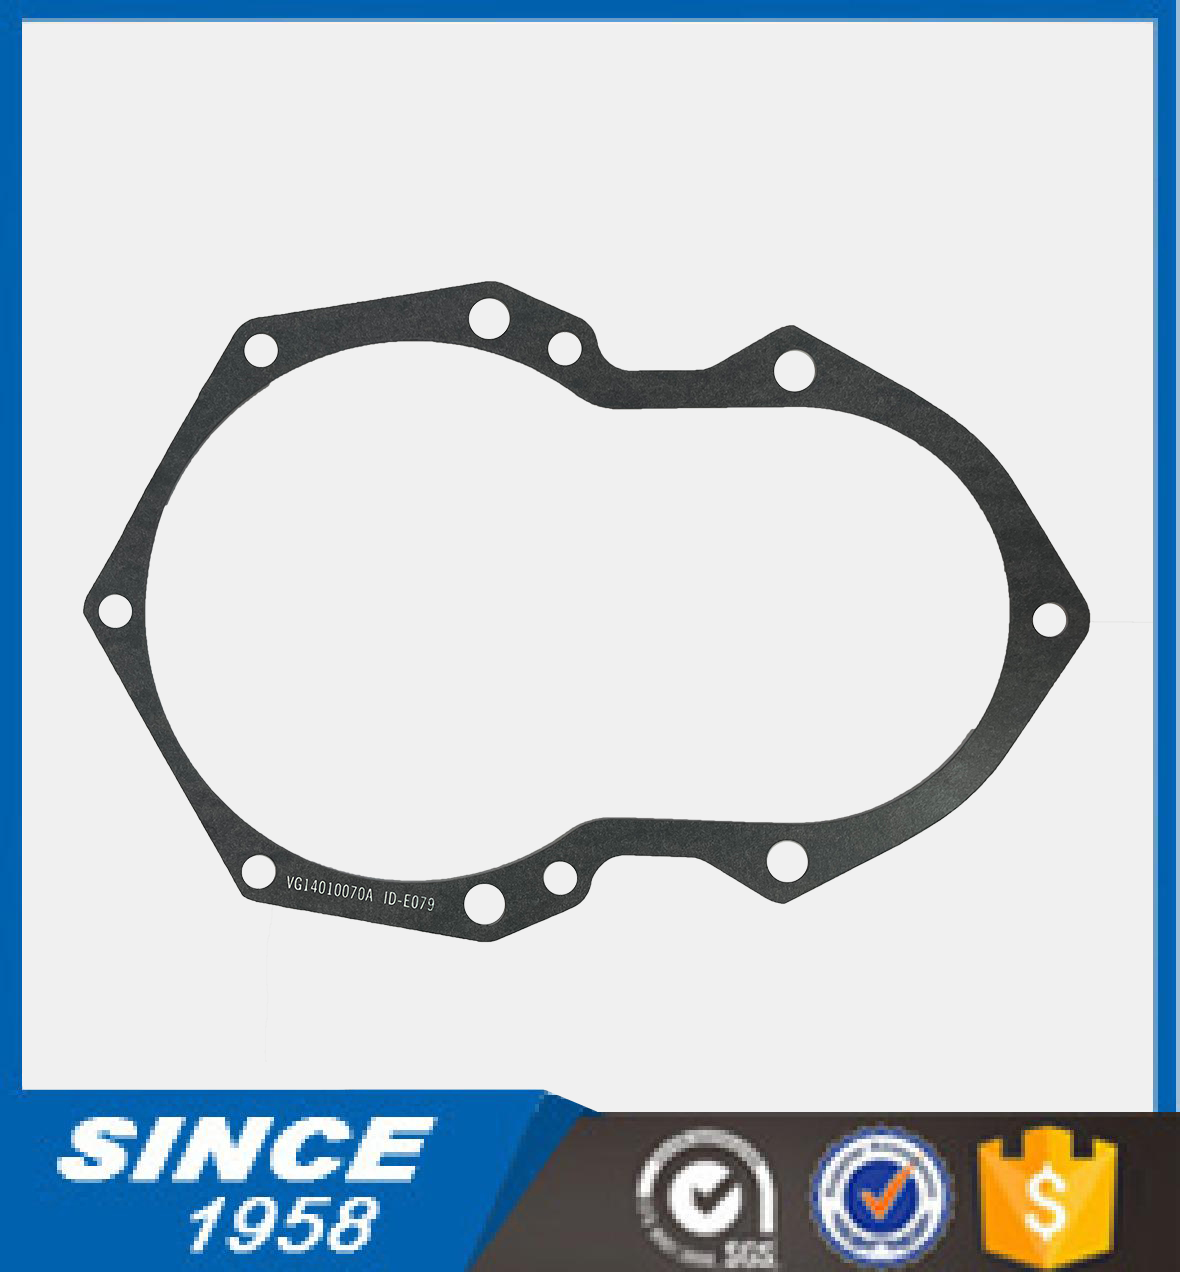 Camshaft gear cover gasket VG14010070A